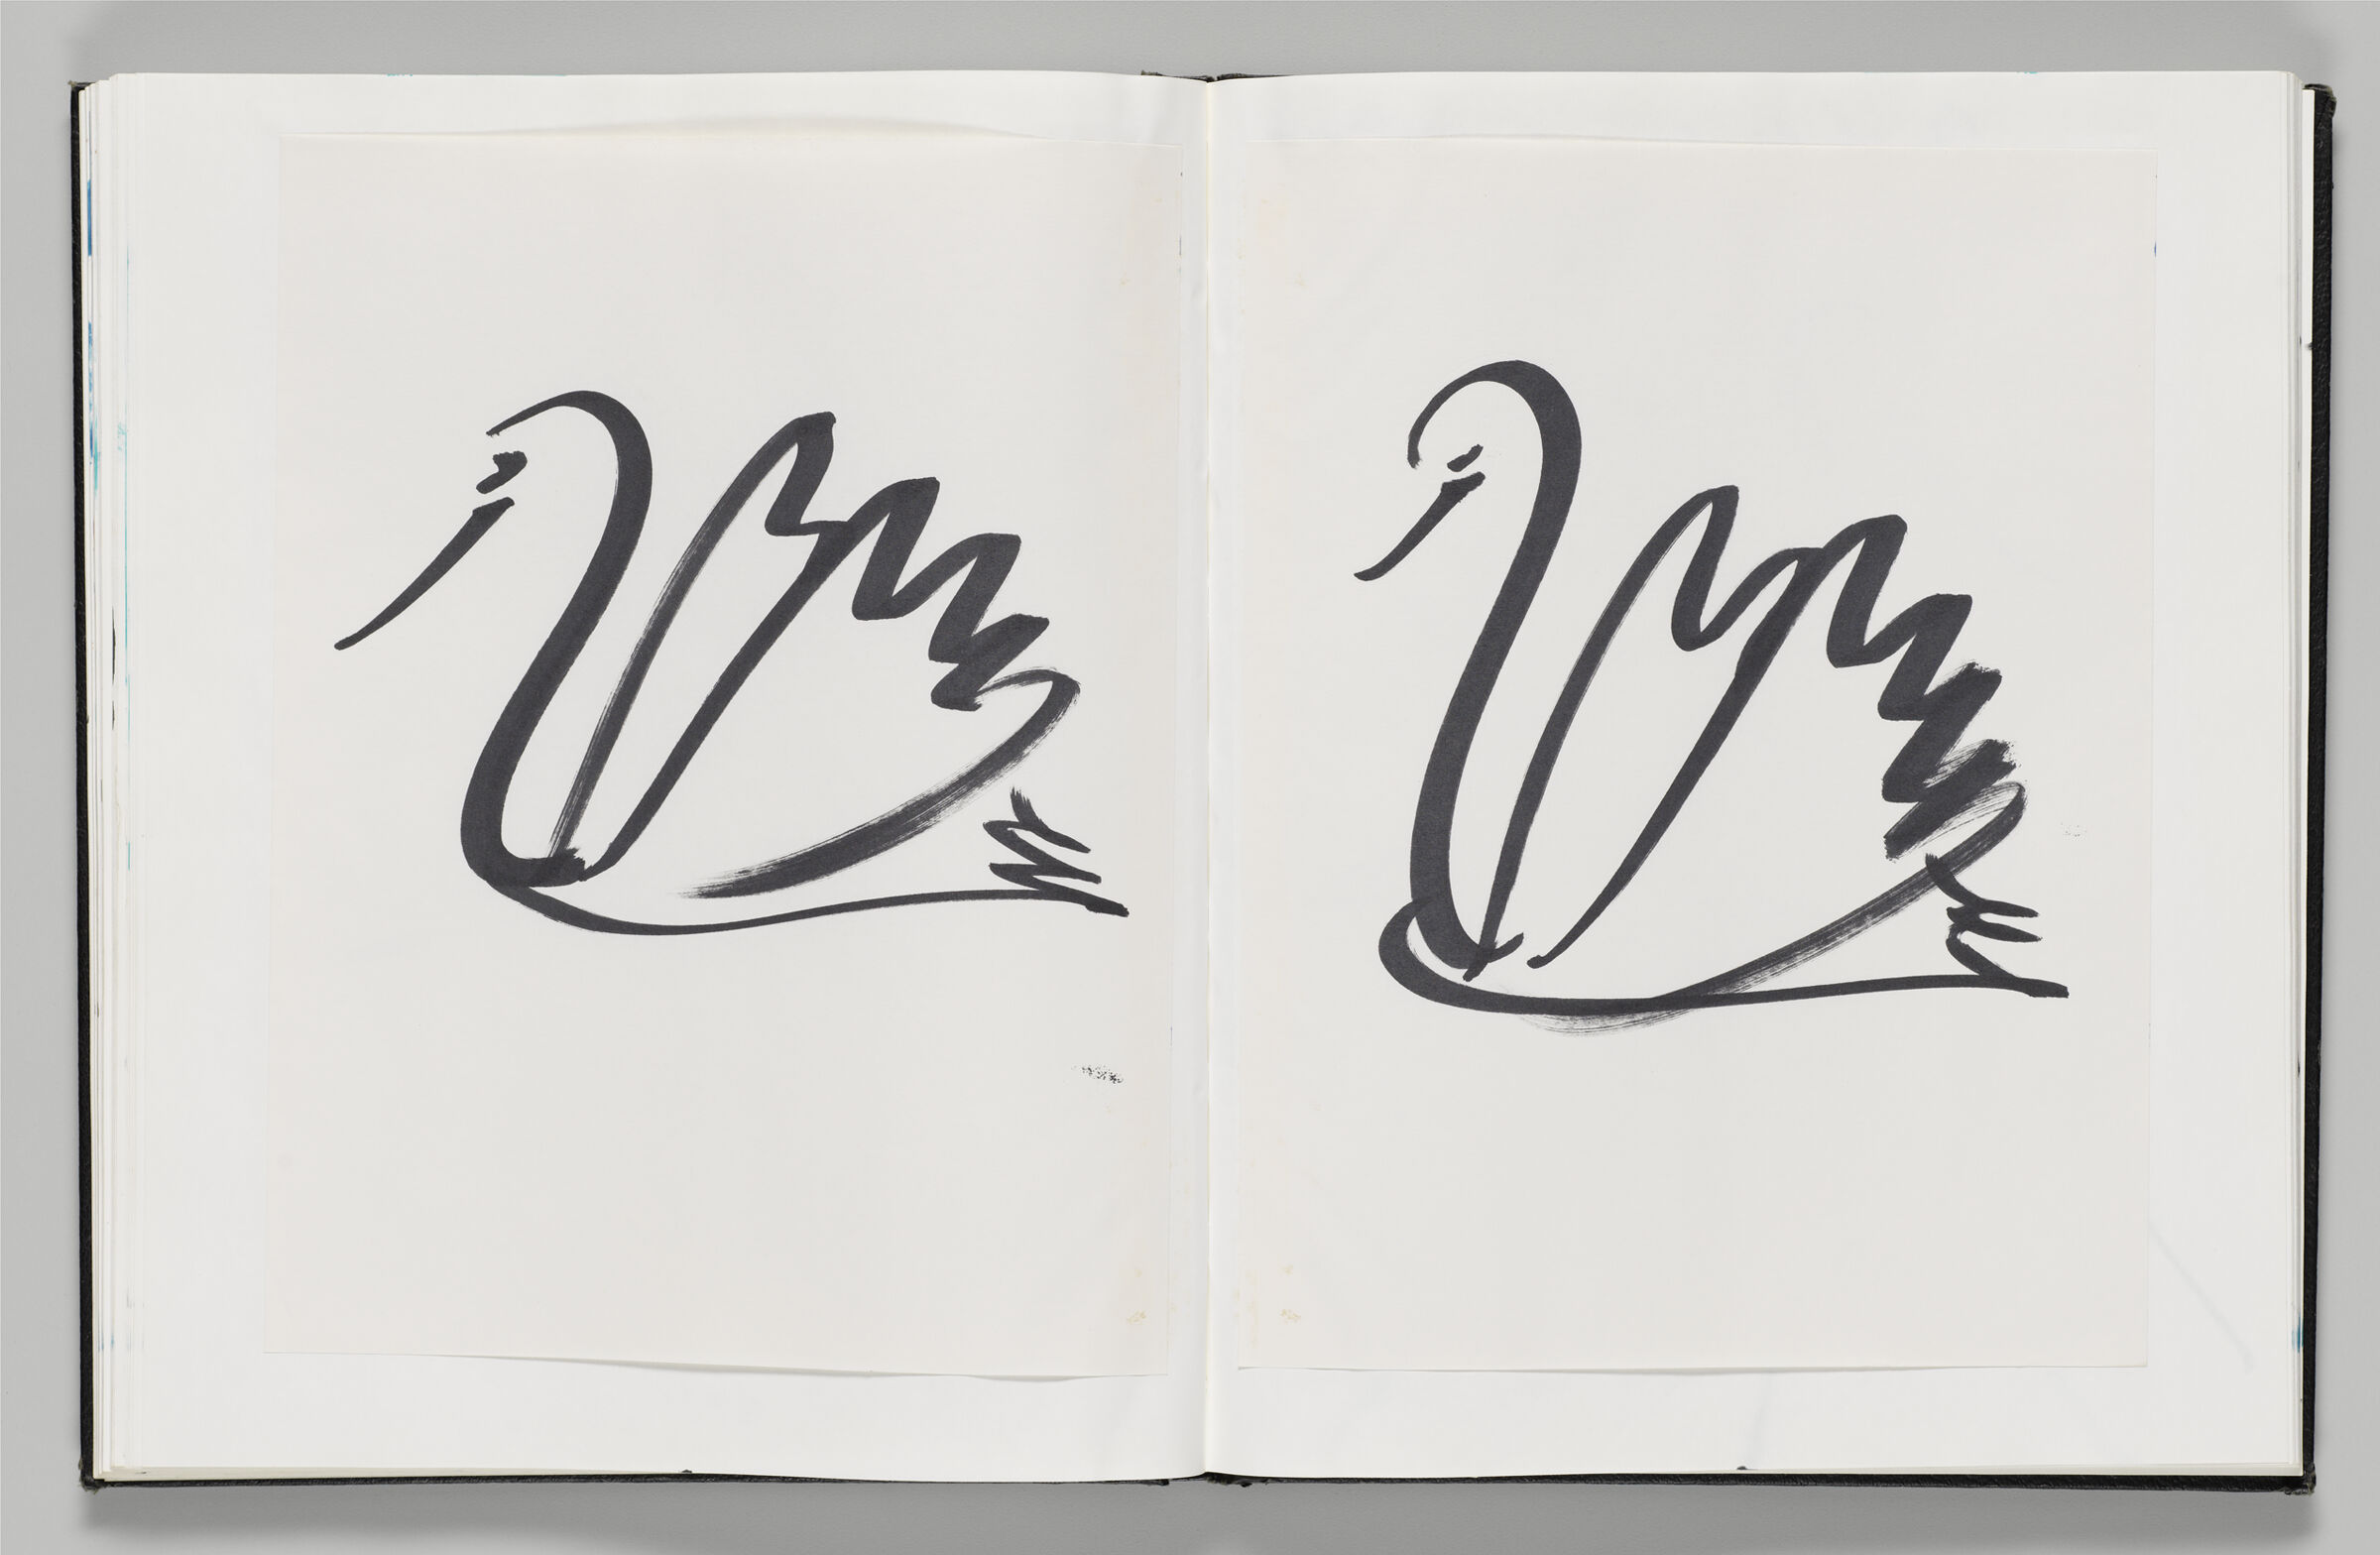 Untitled (Adhered Sketch Of Swan, Left Page); Untitled (Adhered Sketch Of Swan, Right Page)